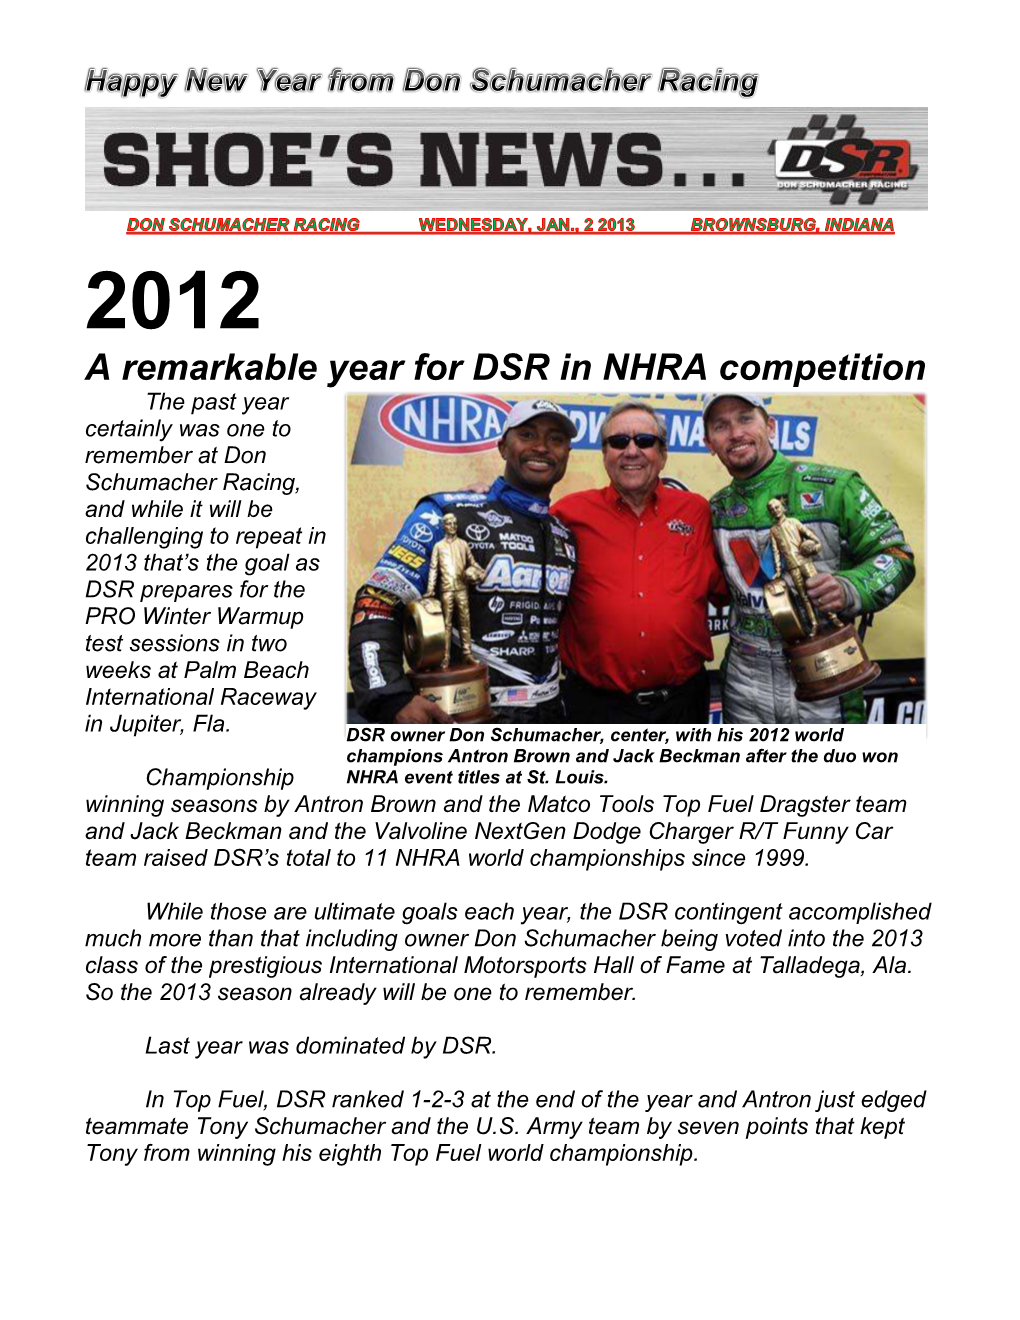 A Remarkable Year for DSR in NHRA Competition